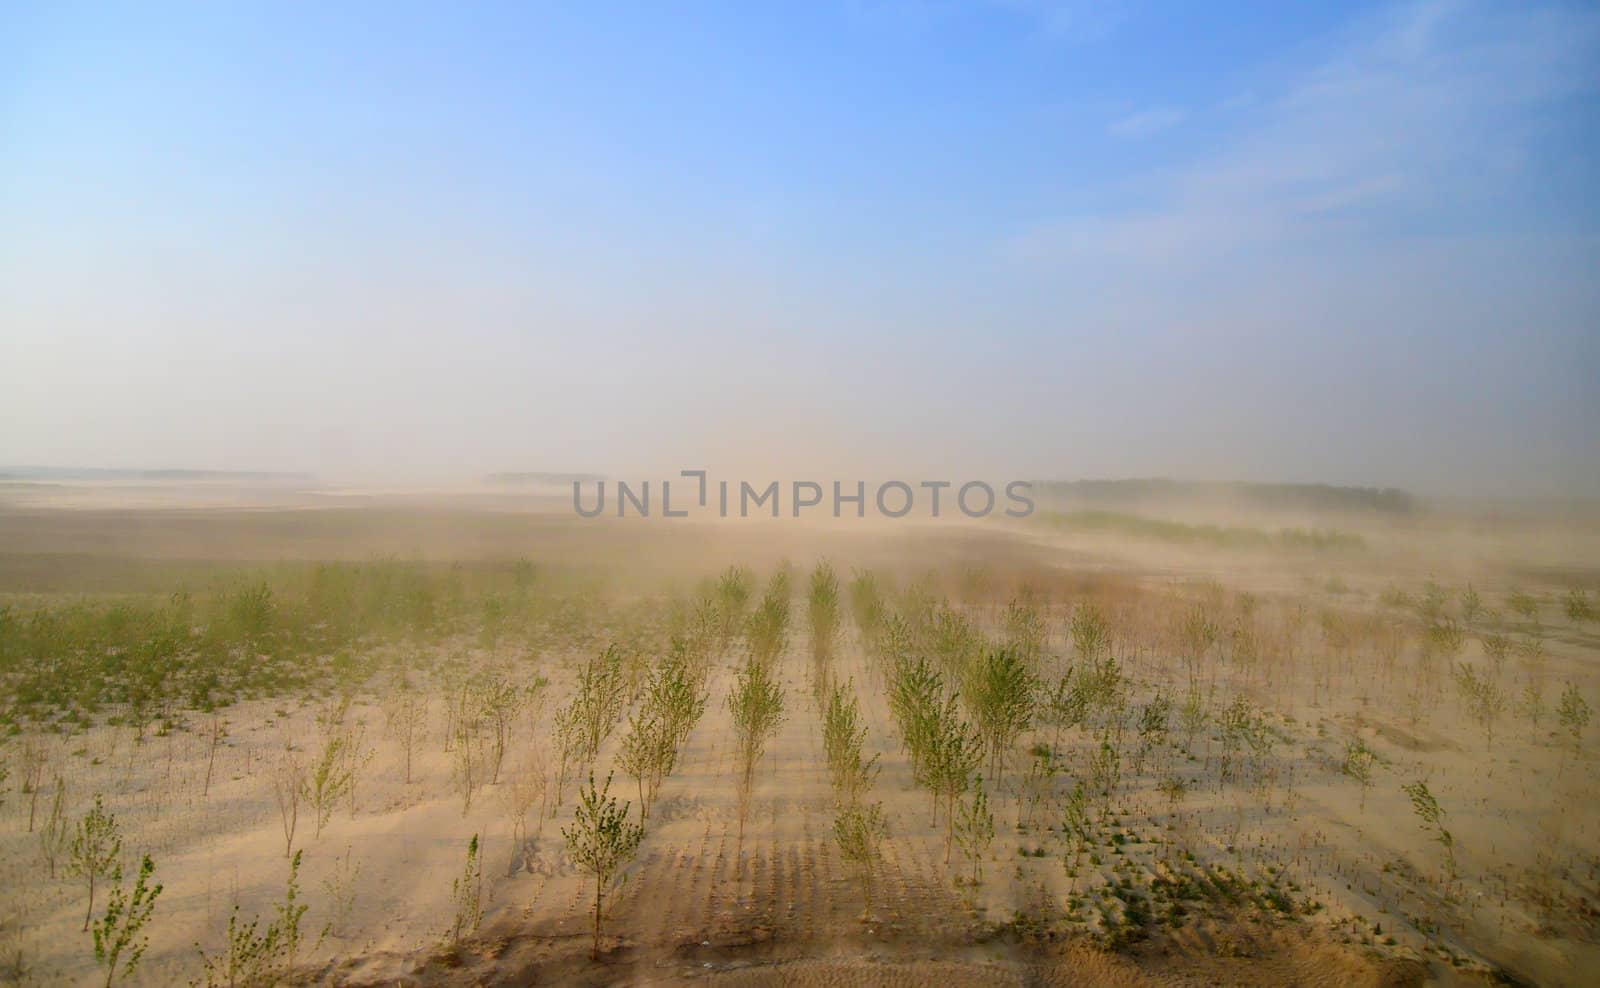 View of the sand storm in day time. North east China.